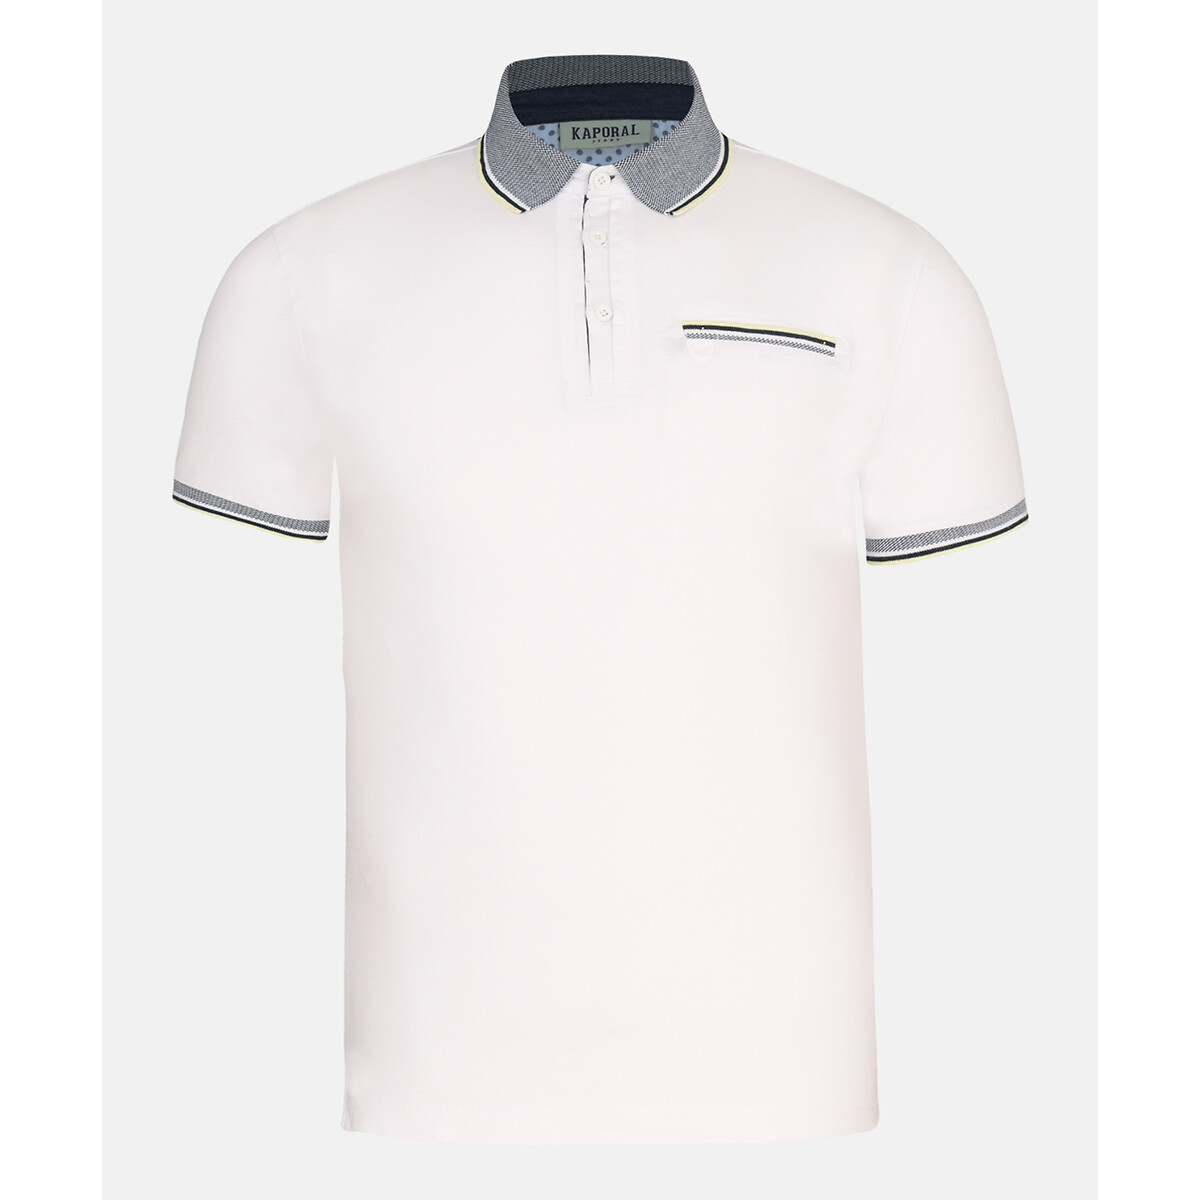 Munik Jersey Polo Shirt in Cotton and Regular Fit